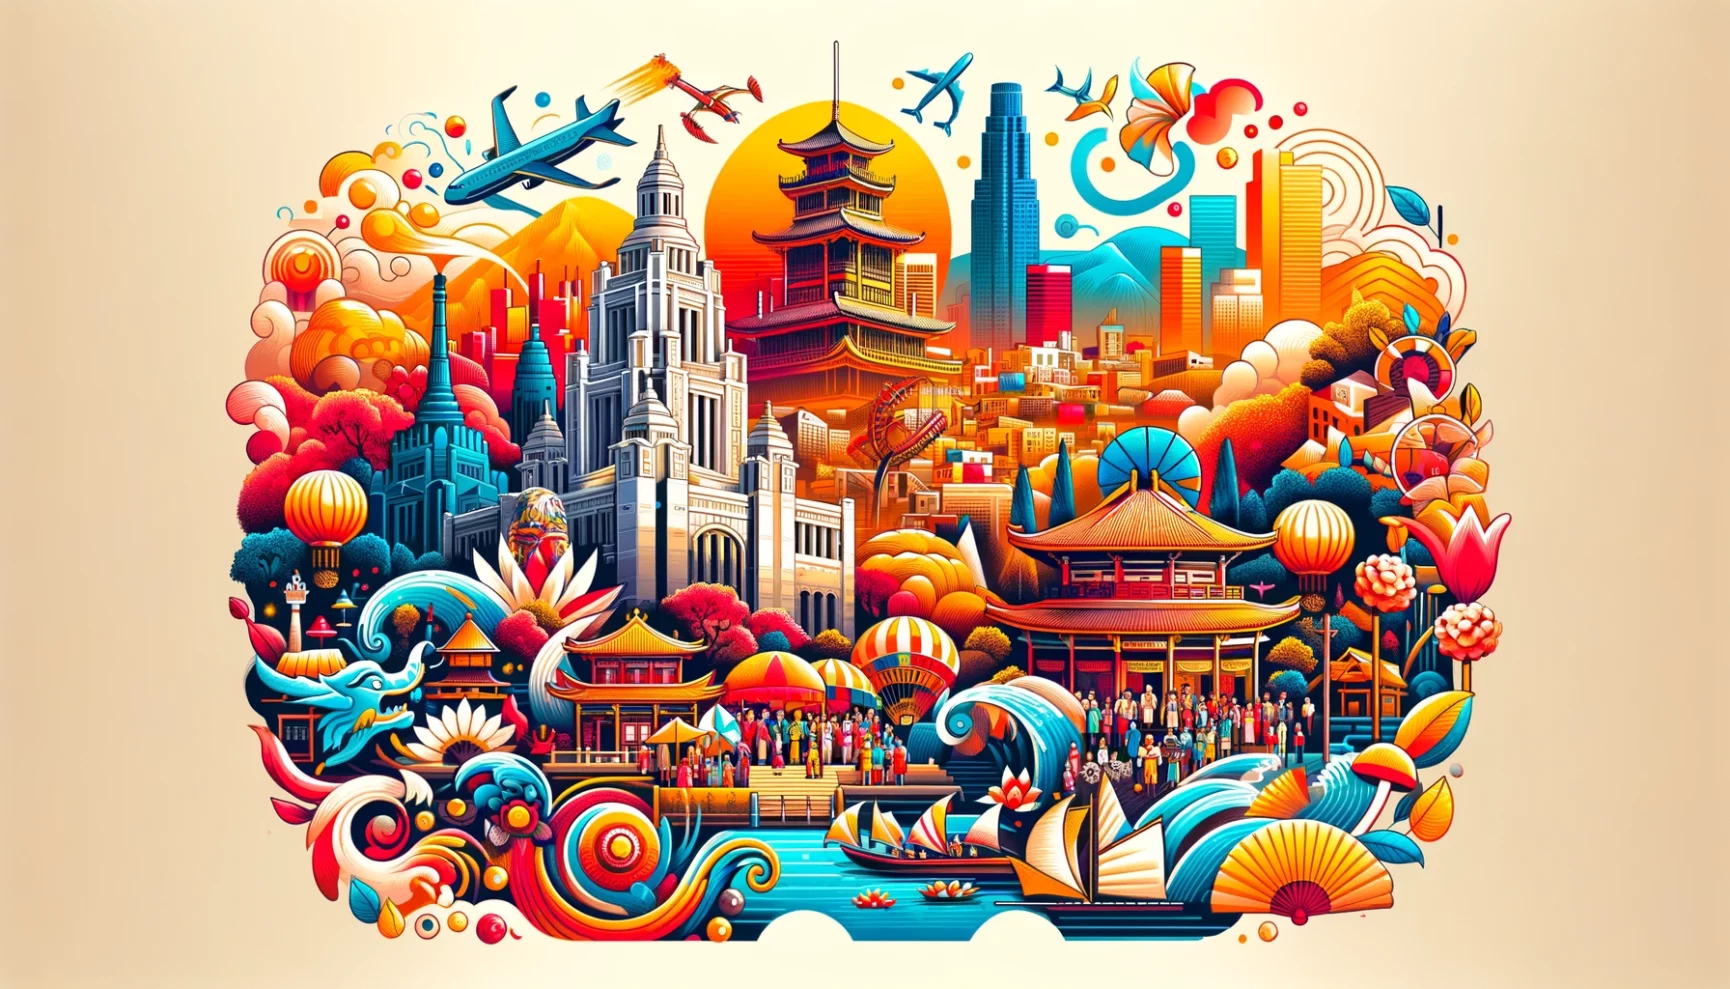 Colorful and intricate illustration blending traditional and modern elements to represent a vibrant cityscape.